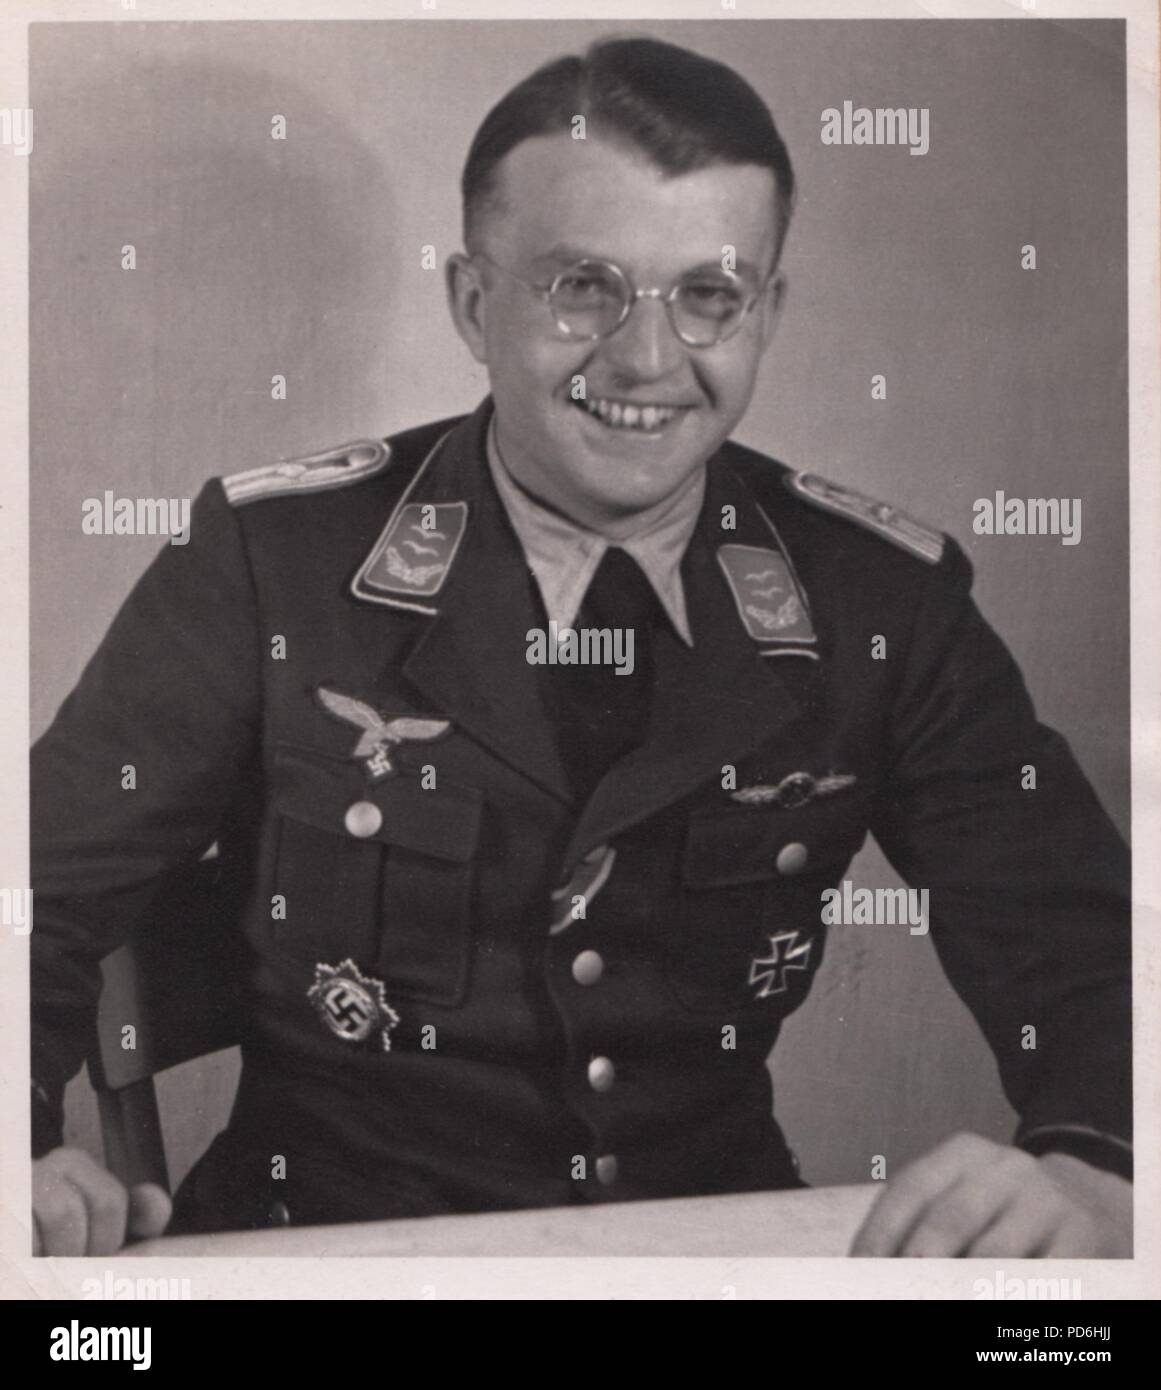 Image from the photo album of Oberleutnant Oscar Müller of  Kampfgeschwader 1: Oberleutnant Hans Sumpf in his office at Dno Airfield in Russia in 1942. Sumpf was Staffelkapitän of 5./KG1 from 7th October 1941 until his death on 26th March 1942. He was posthumously awarded the Ritterkreuz (Knight's Cross of the Iron Cross) on 20th August 1942. Stock Photo